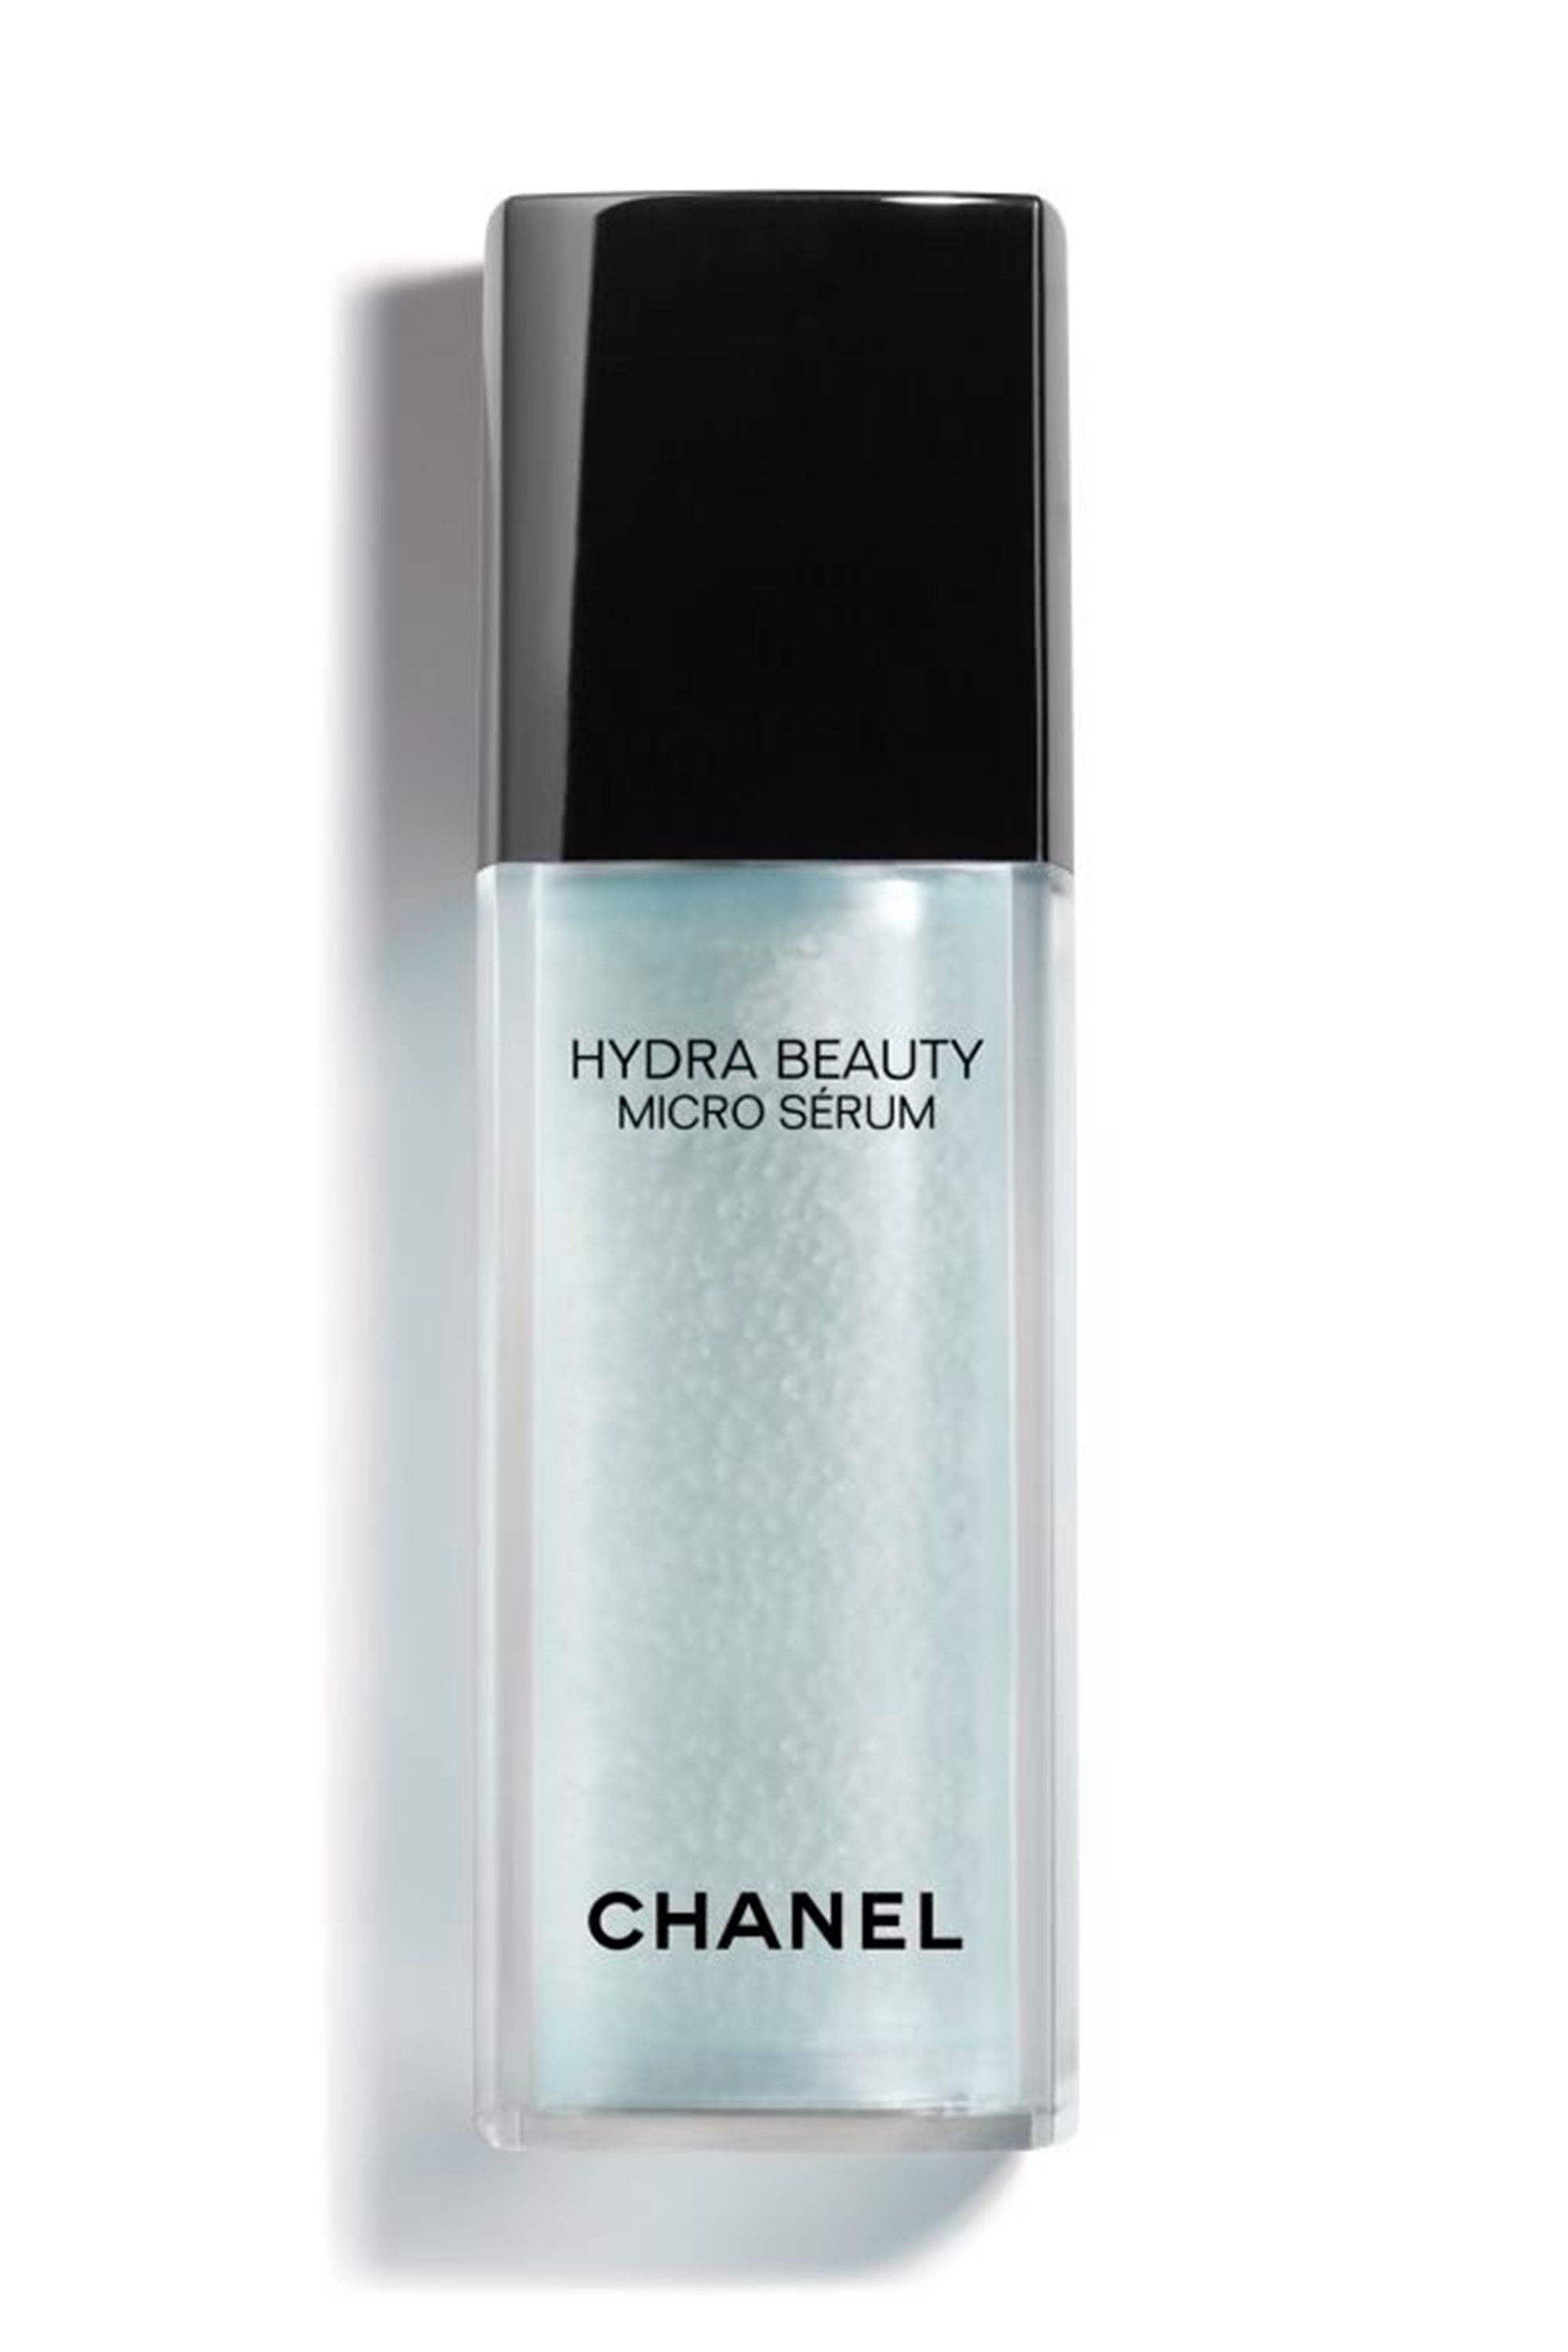 BeautyBestSellers | Chanel's 10 best-selling beauty products